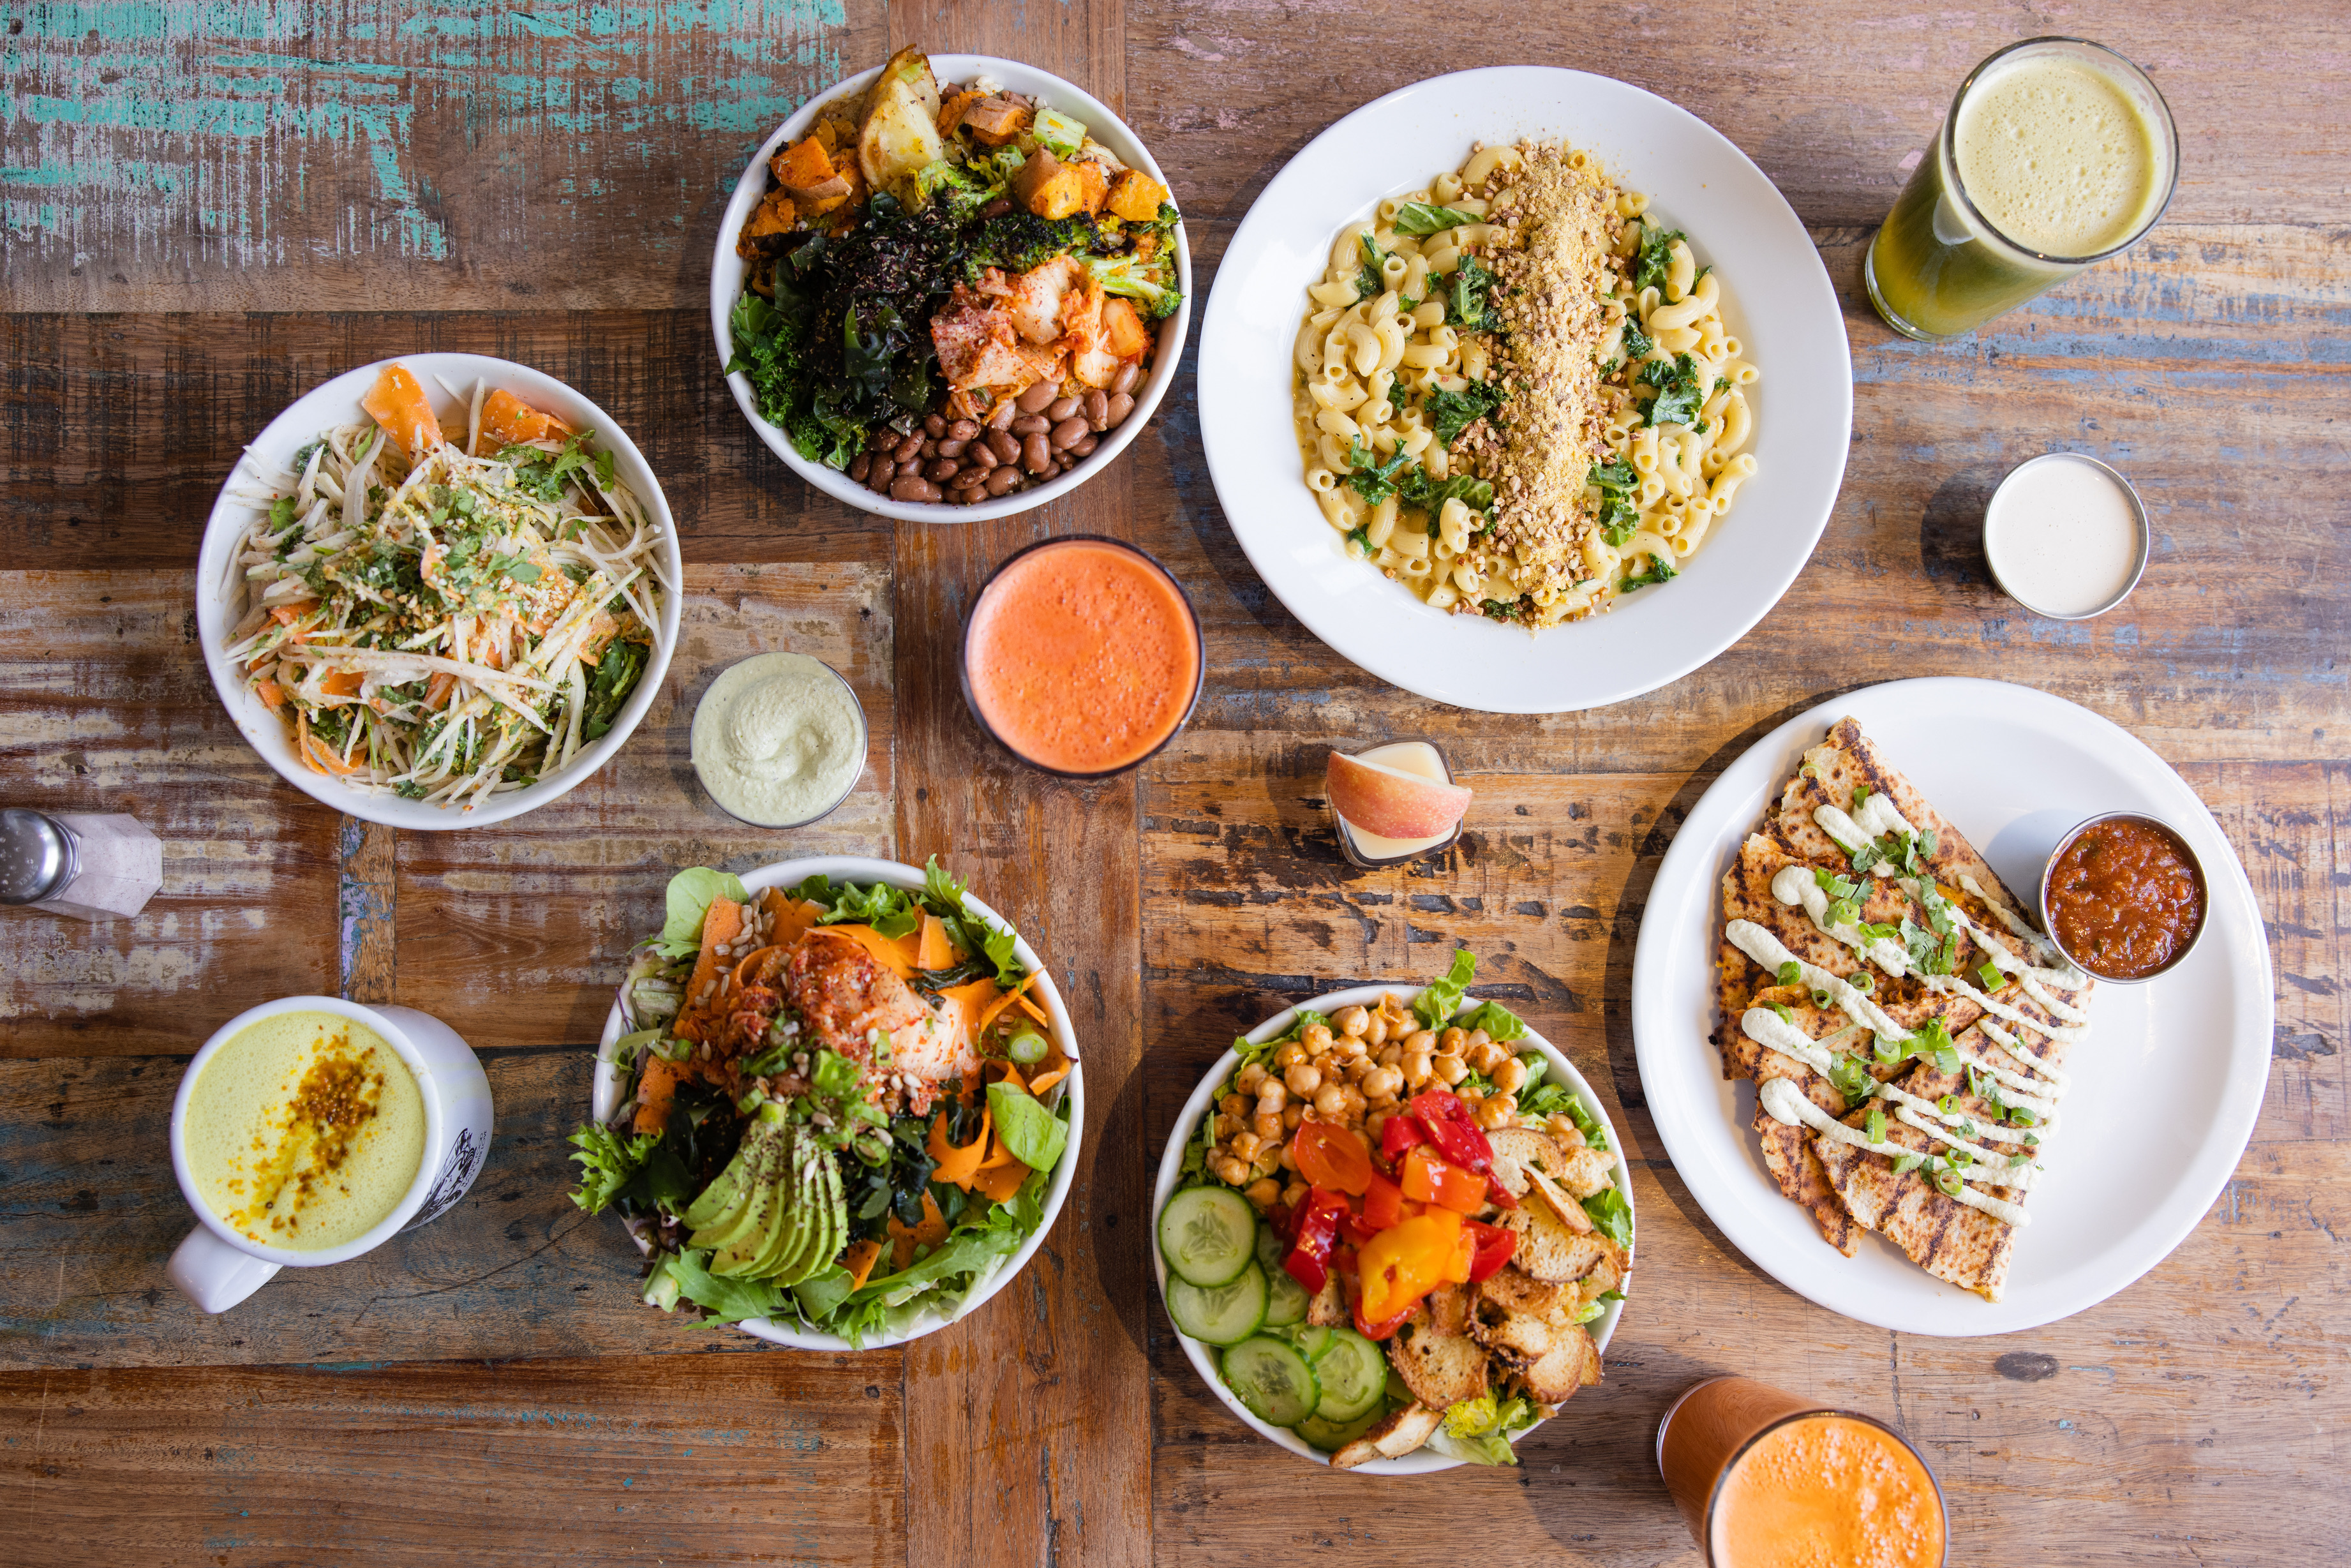 An overhead shot of a table with several dishes, including salads, a quesadilla, and mac and cheese.